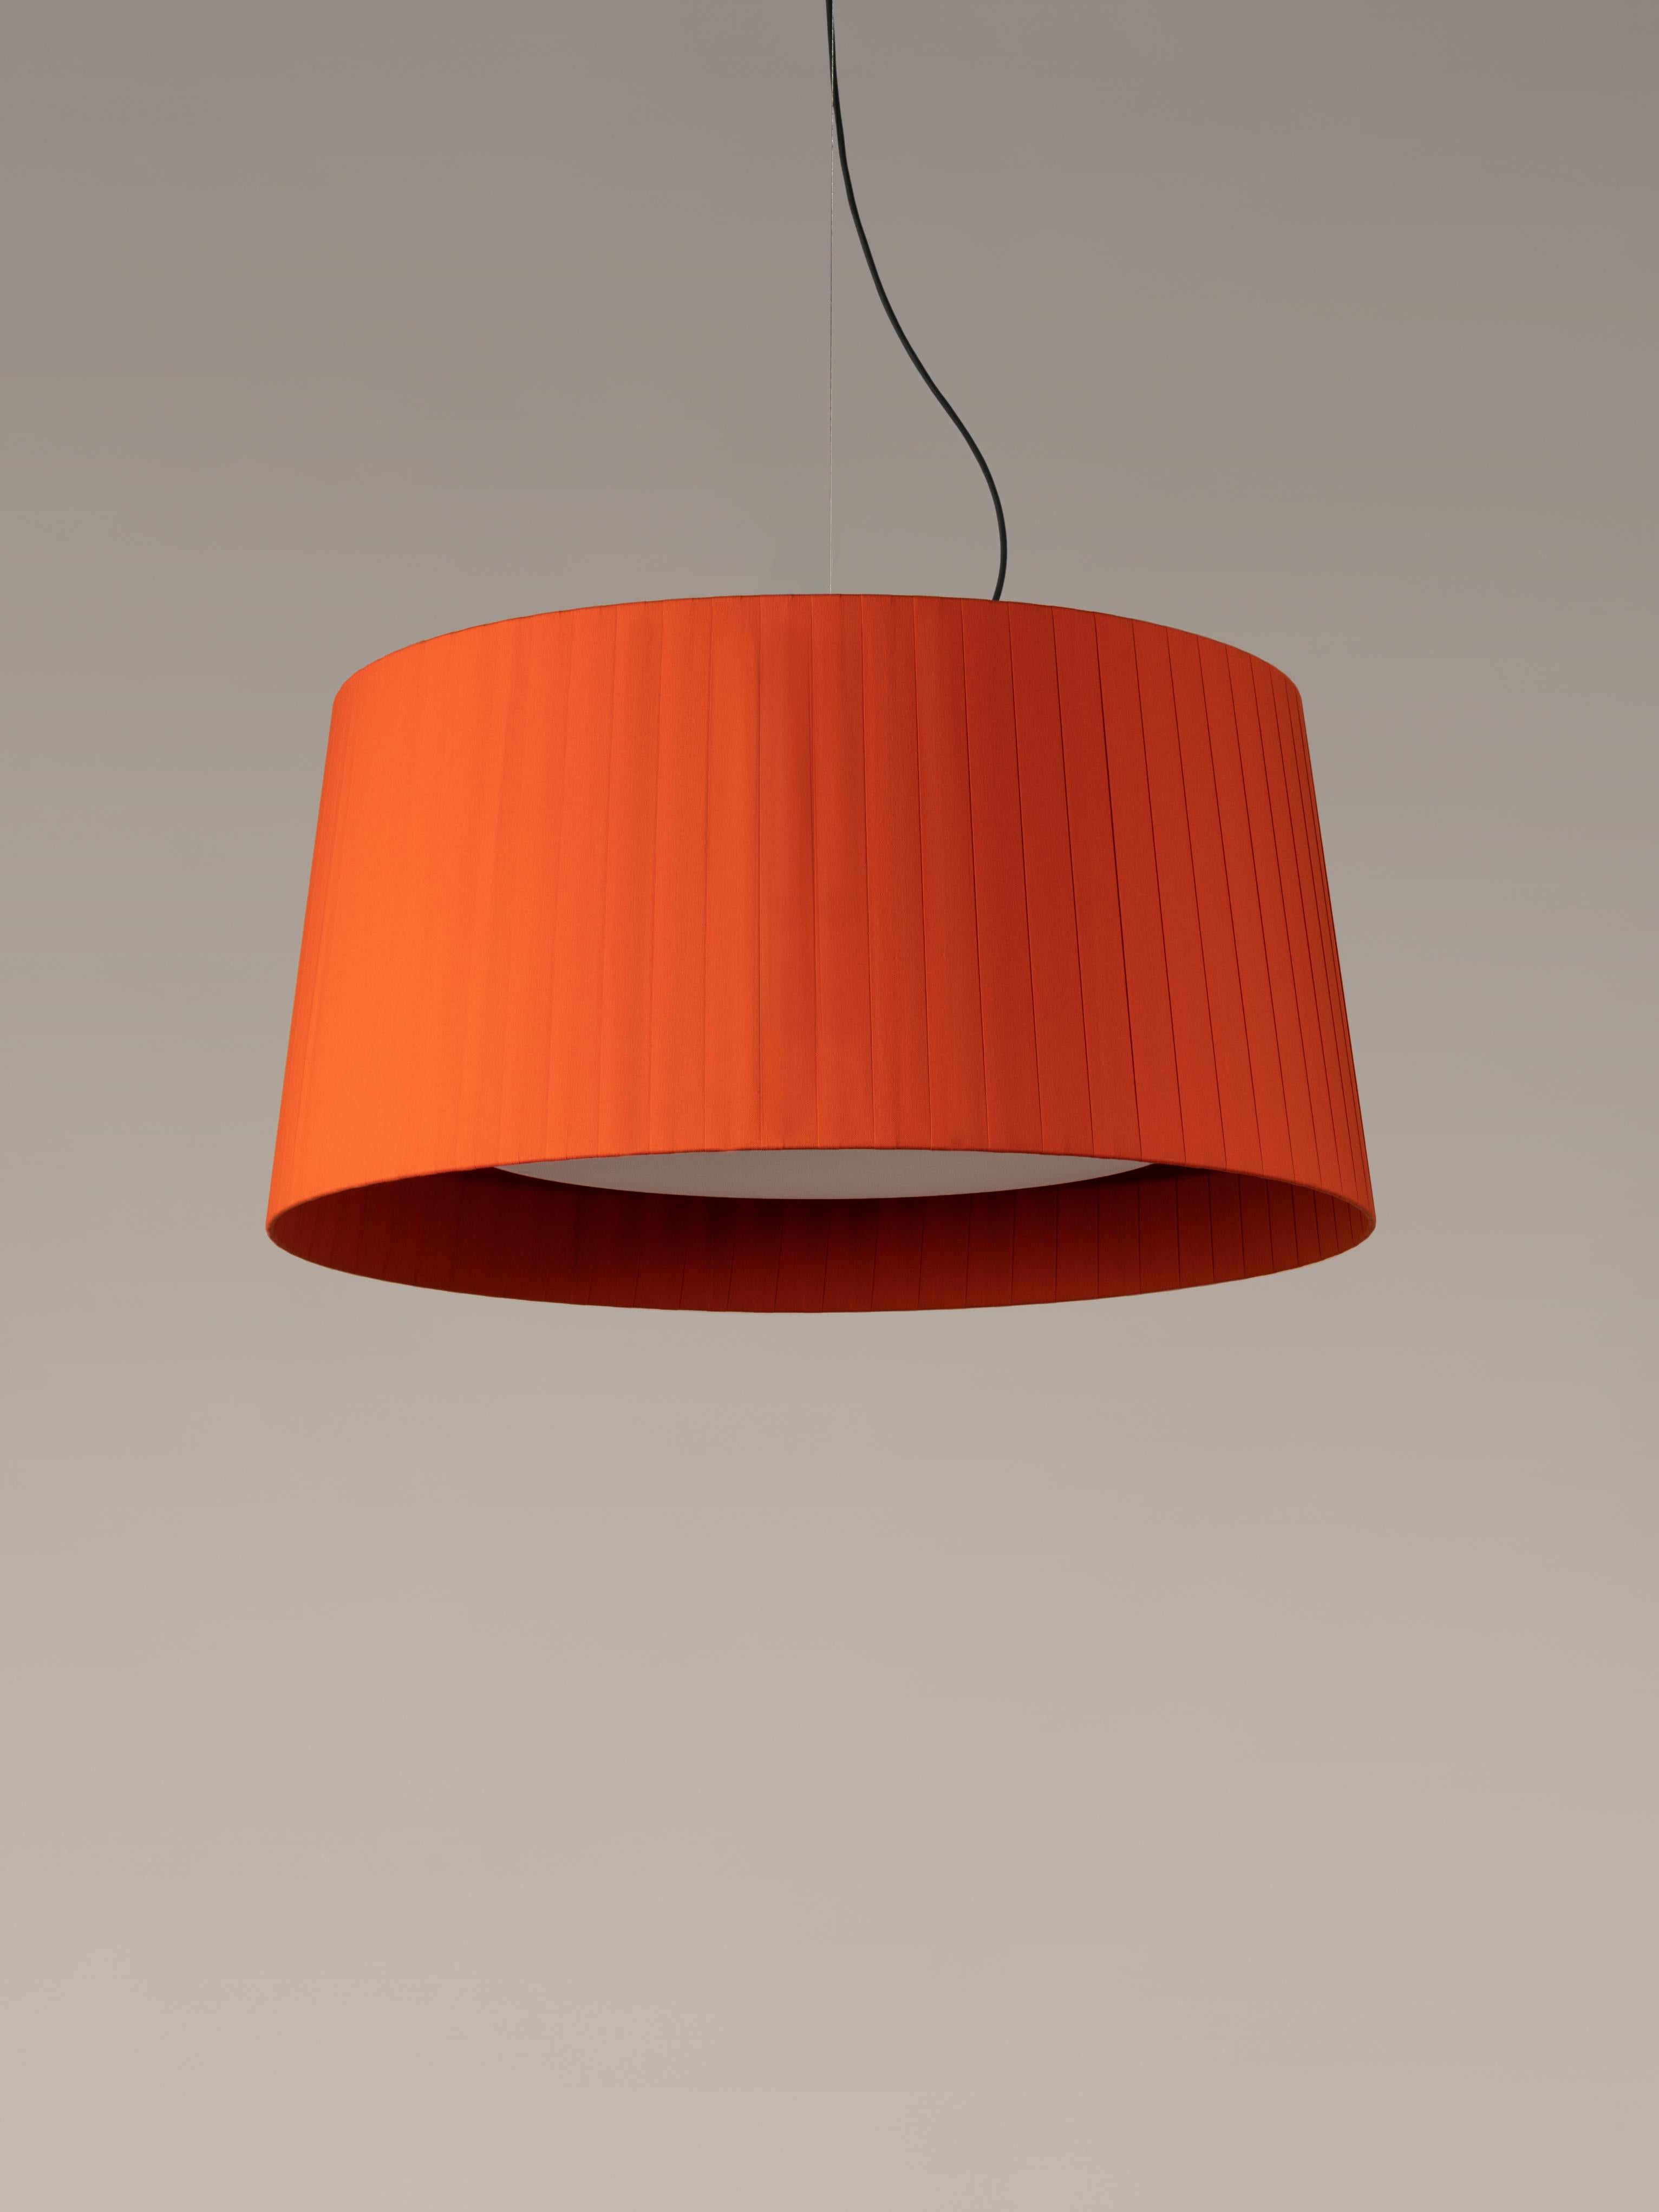 Red GT7 pendant lamp by Santa & Cole
Dimensions: D 90 x H 44 cm
Materials: Metal, ribbon.
Available in other colors.

Designed for intermediate volumes and domestic areas, GT7 is larger, requiring a reinforced structure that adds a metal top